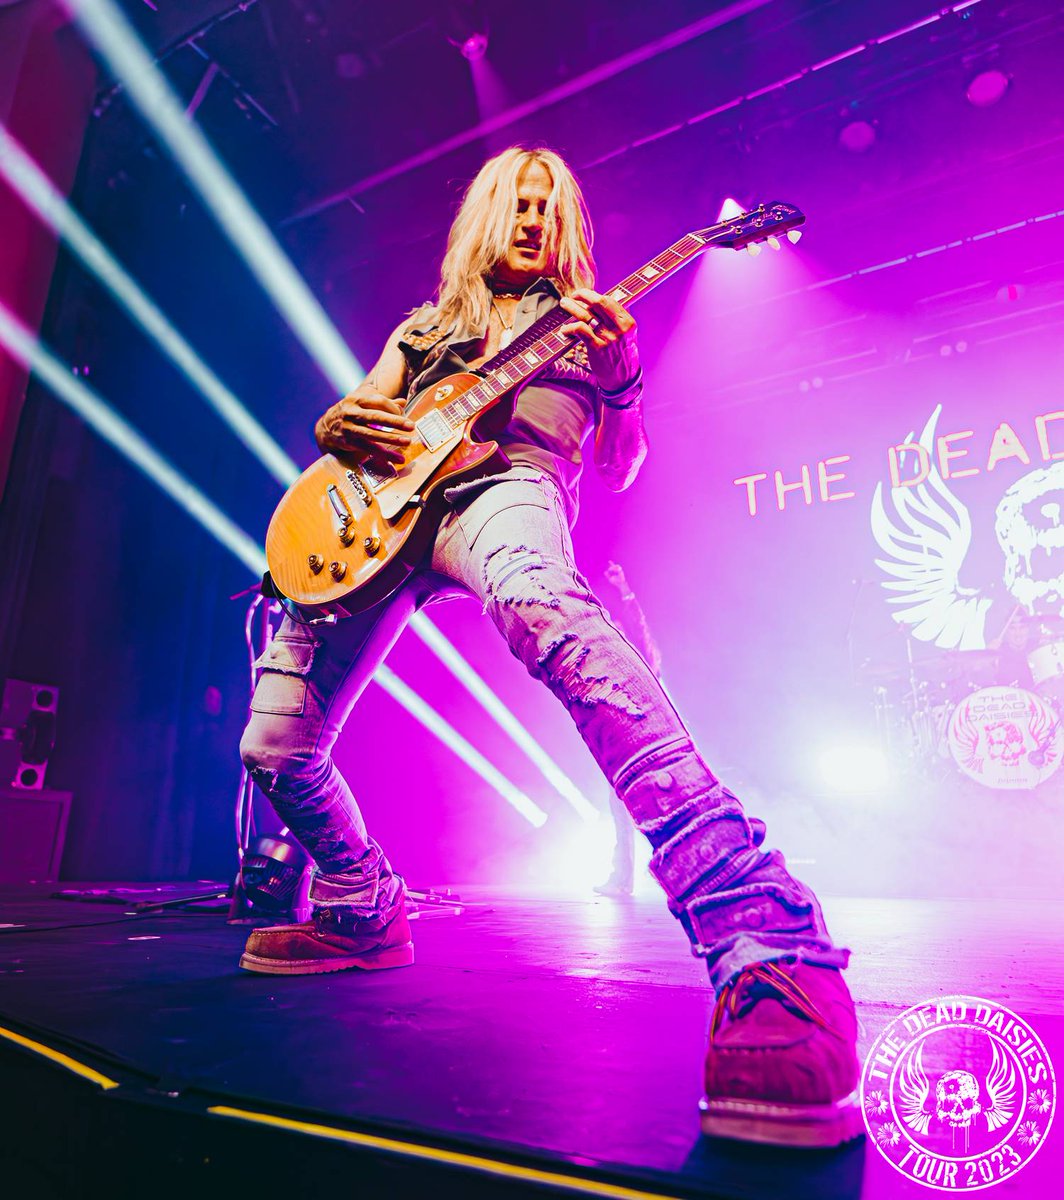 TheDeadDaisies tweet picture